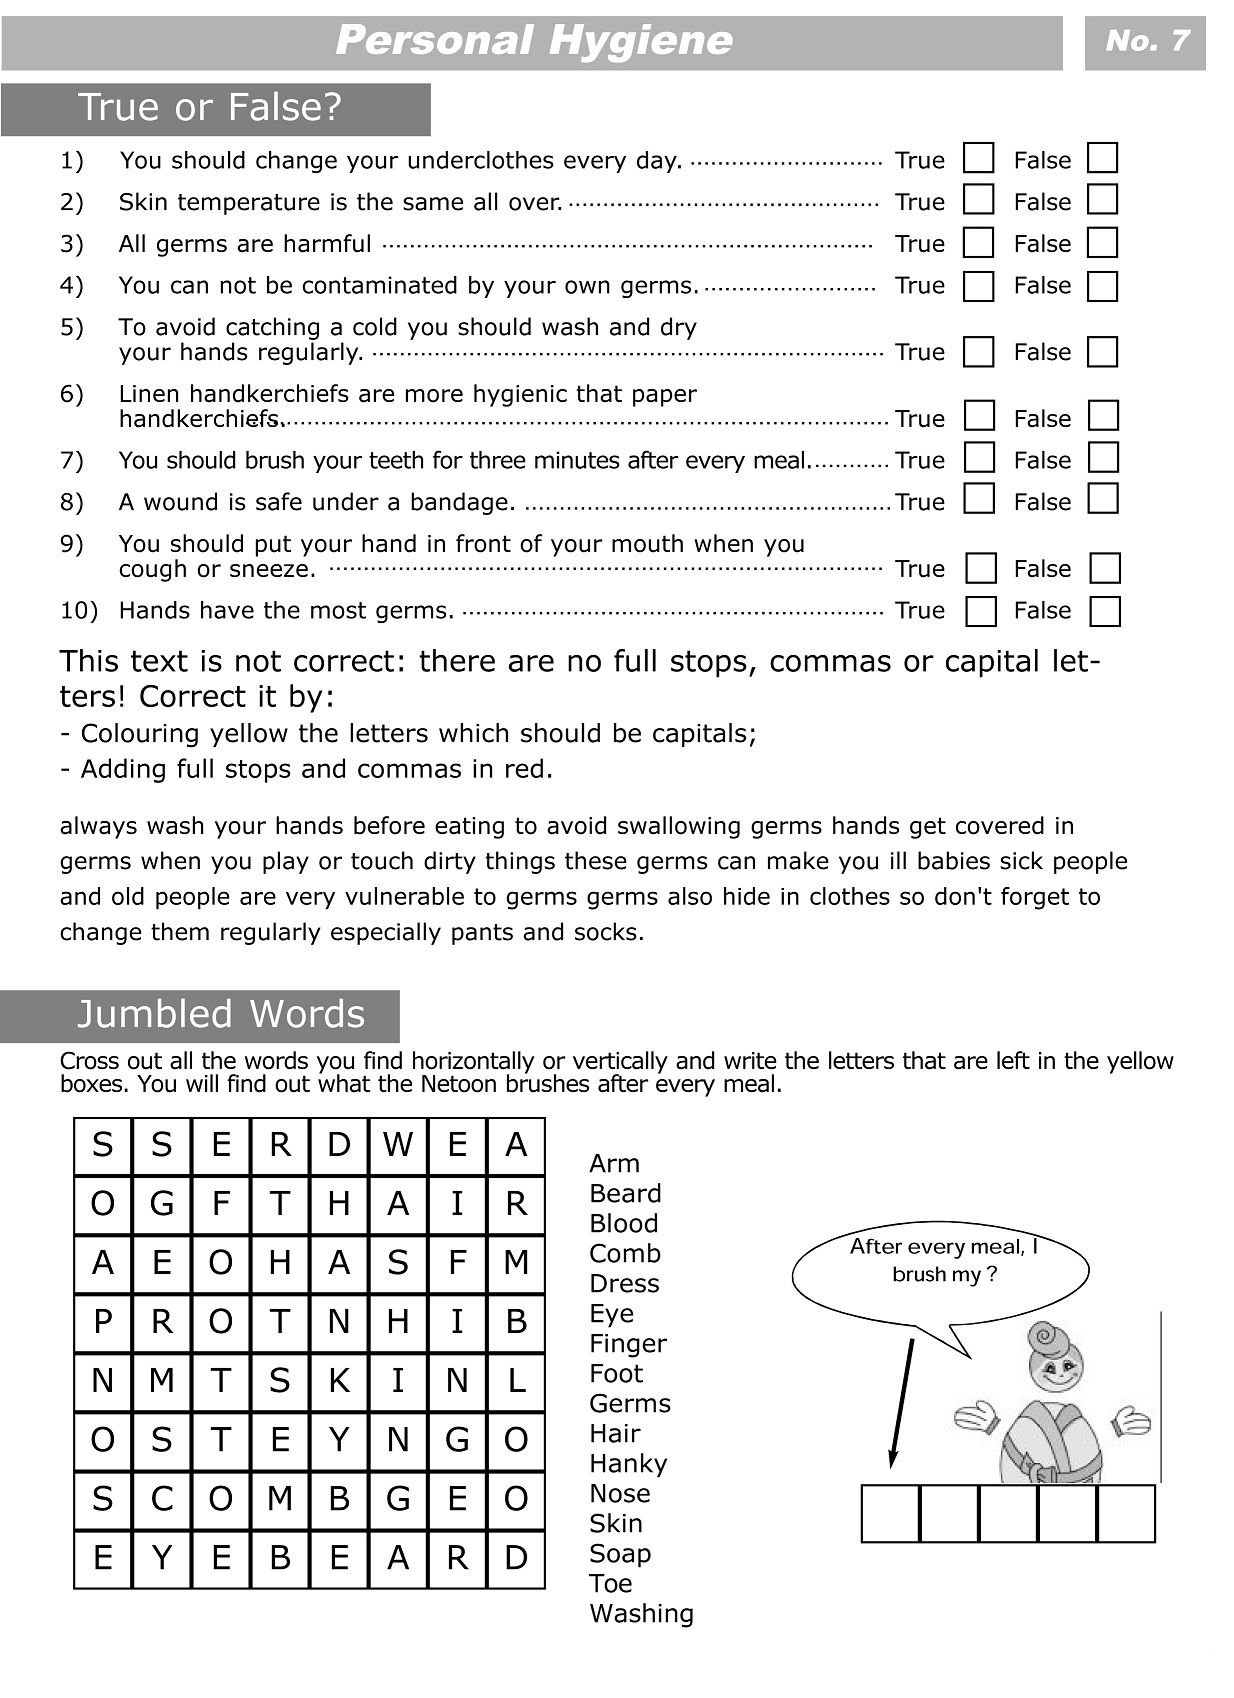 Printable Worksheets For Personal Hygiene | Personal Hygiene - Free Printable Health Worksheets For Middle School